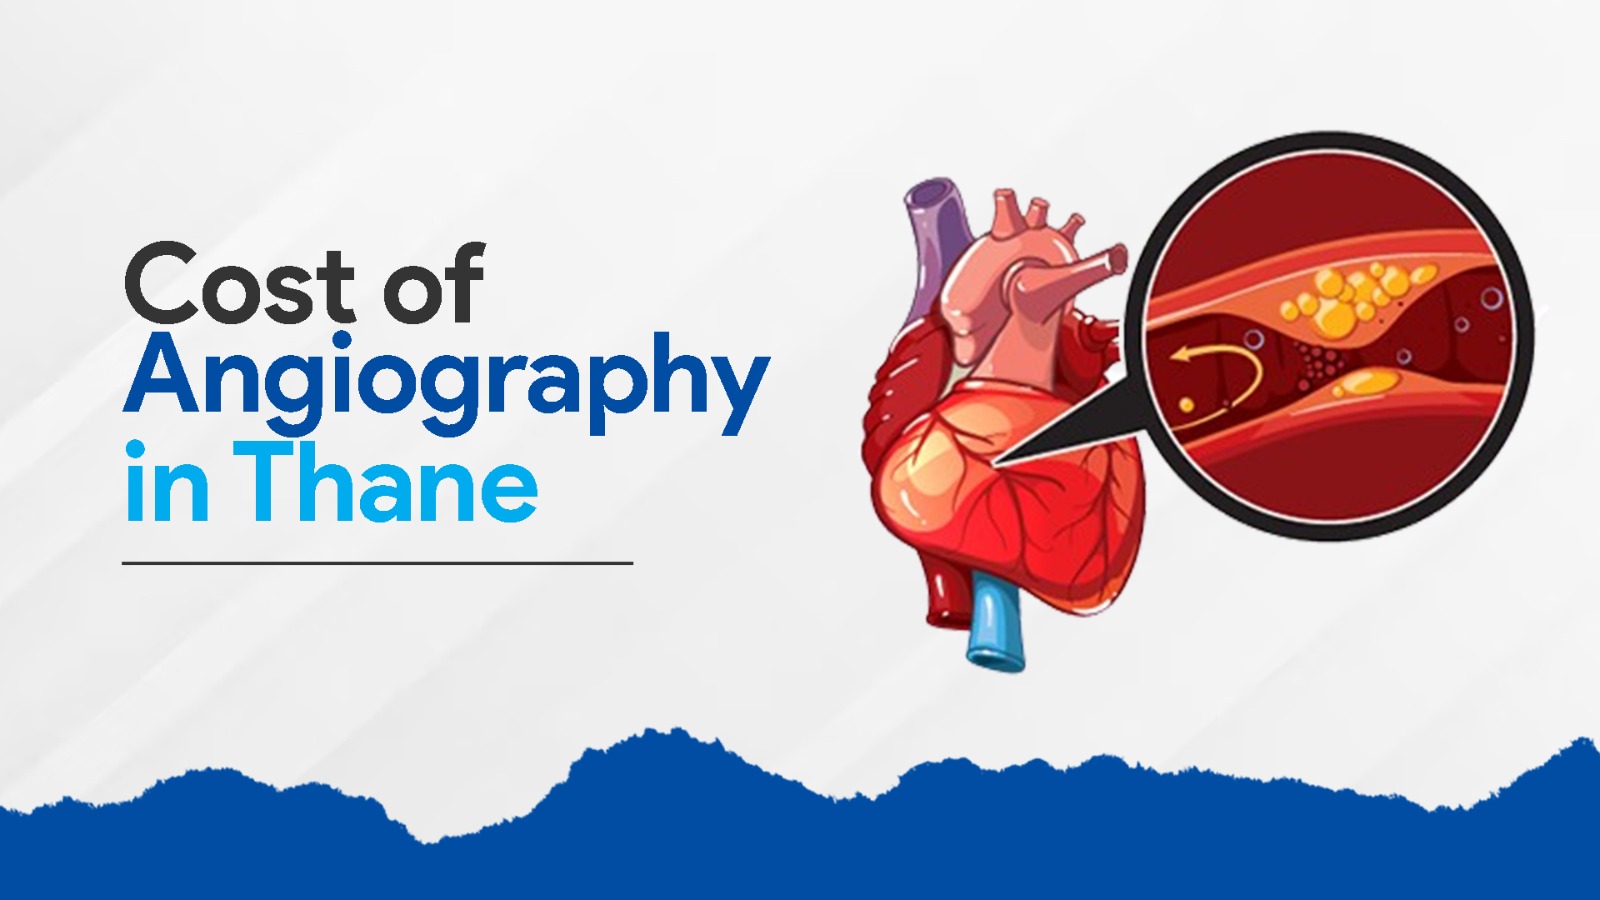 Cost of Angiography in thane